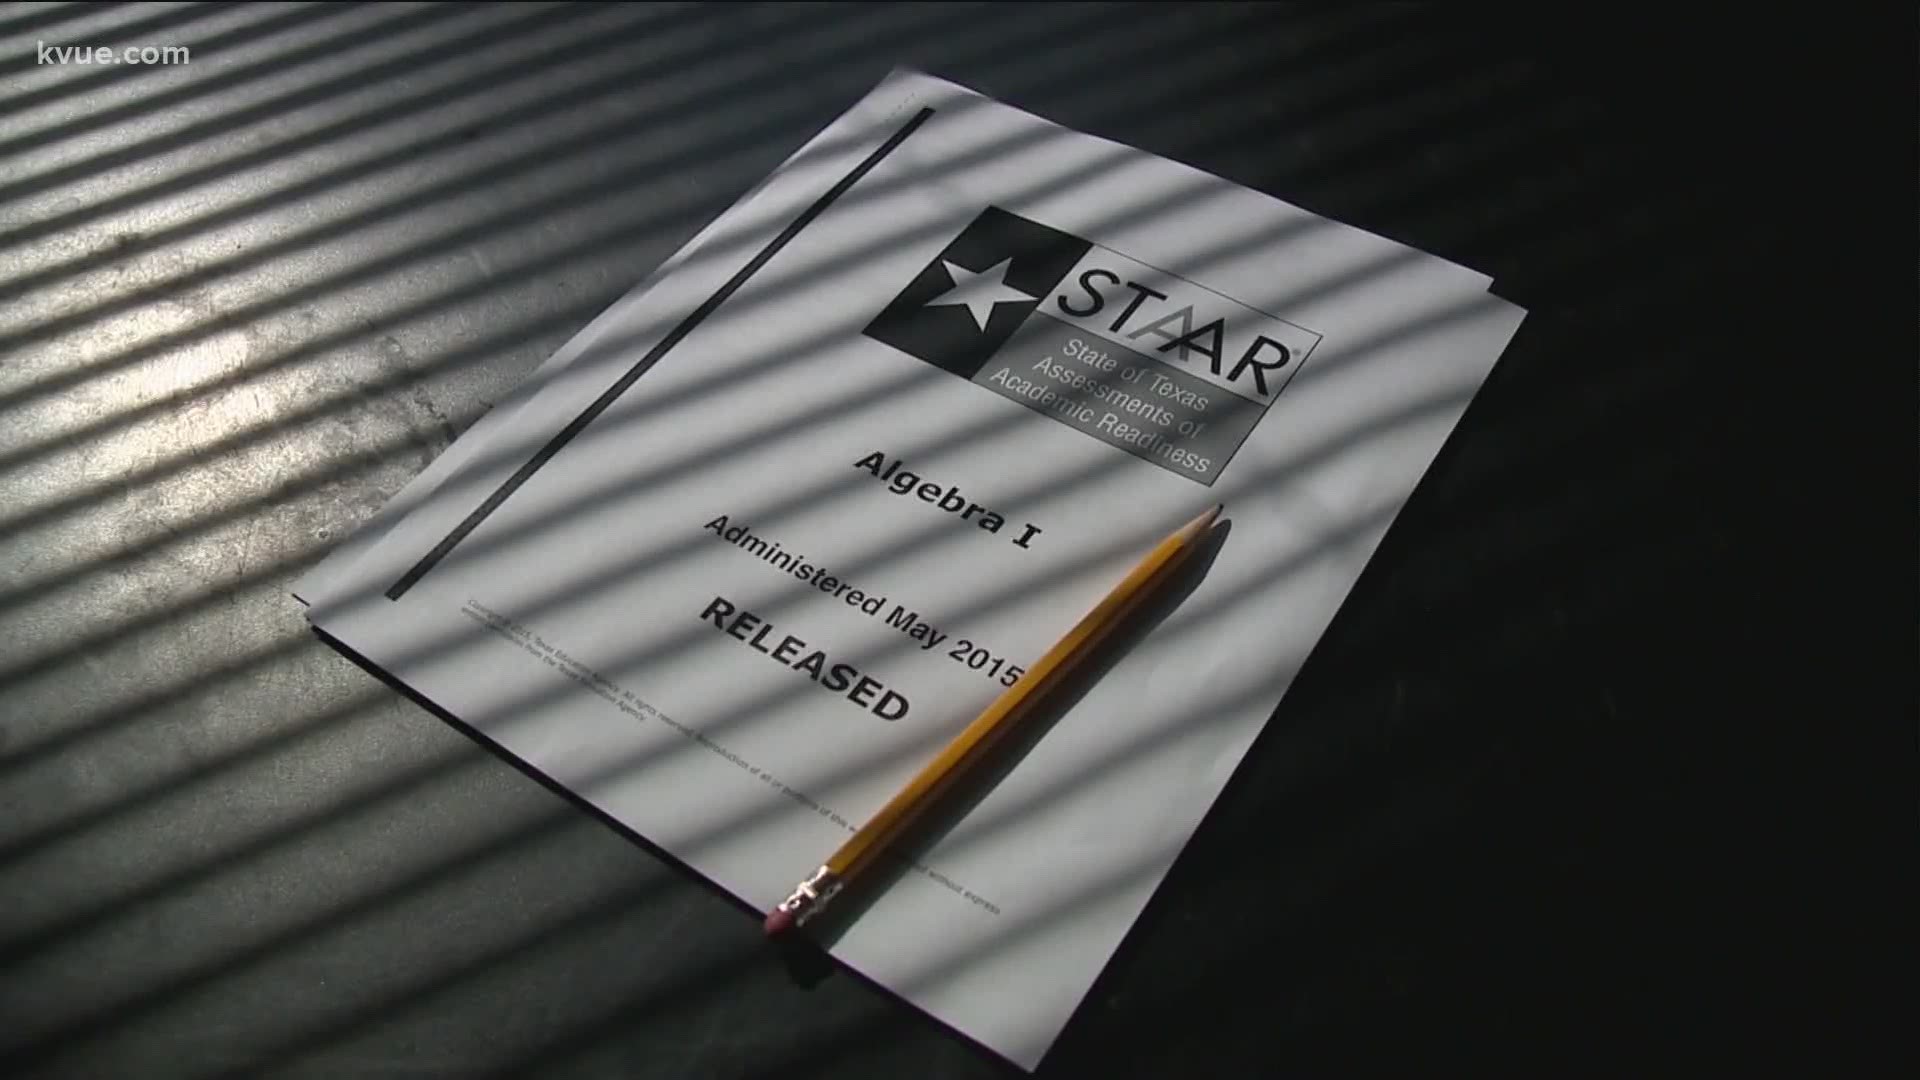 Texas students will have to take the high-stakes STAAR exams this coming school year.